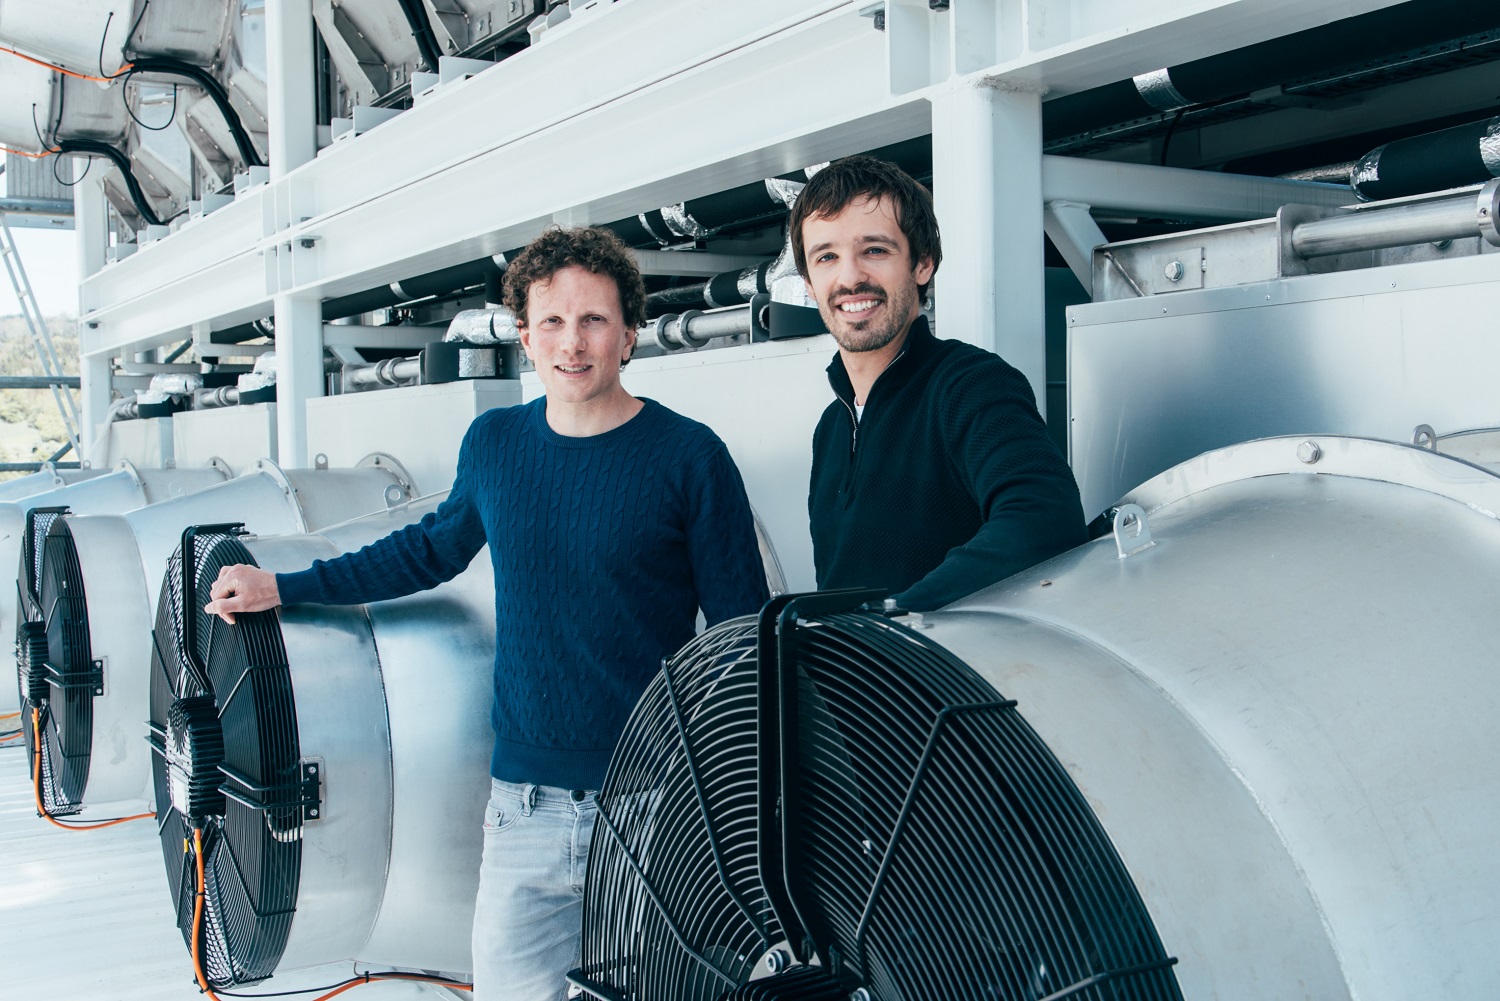 Climeworks' founders Christoph Gebald and Jan Wurzbacher (l to r).